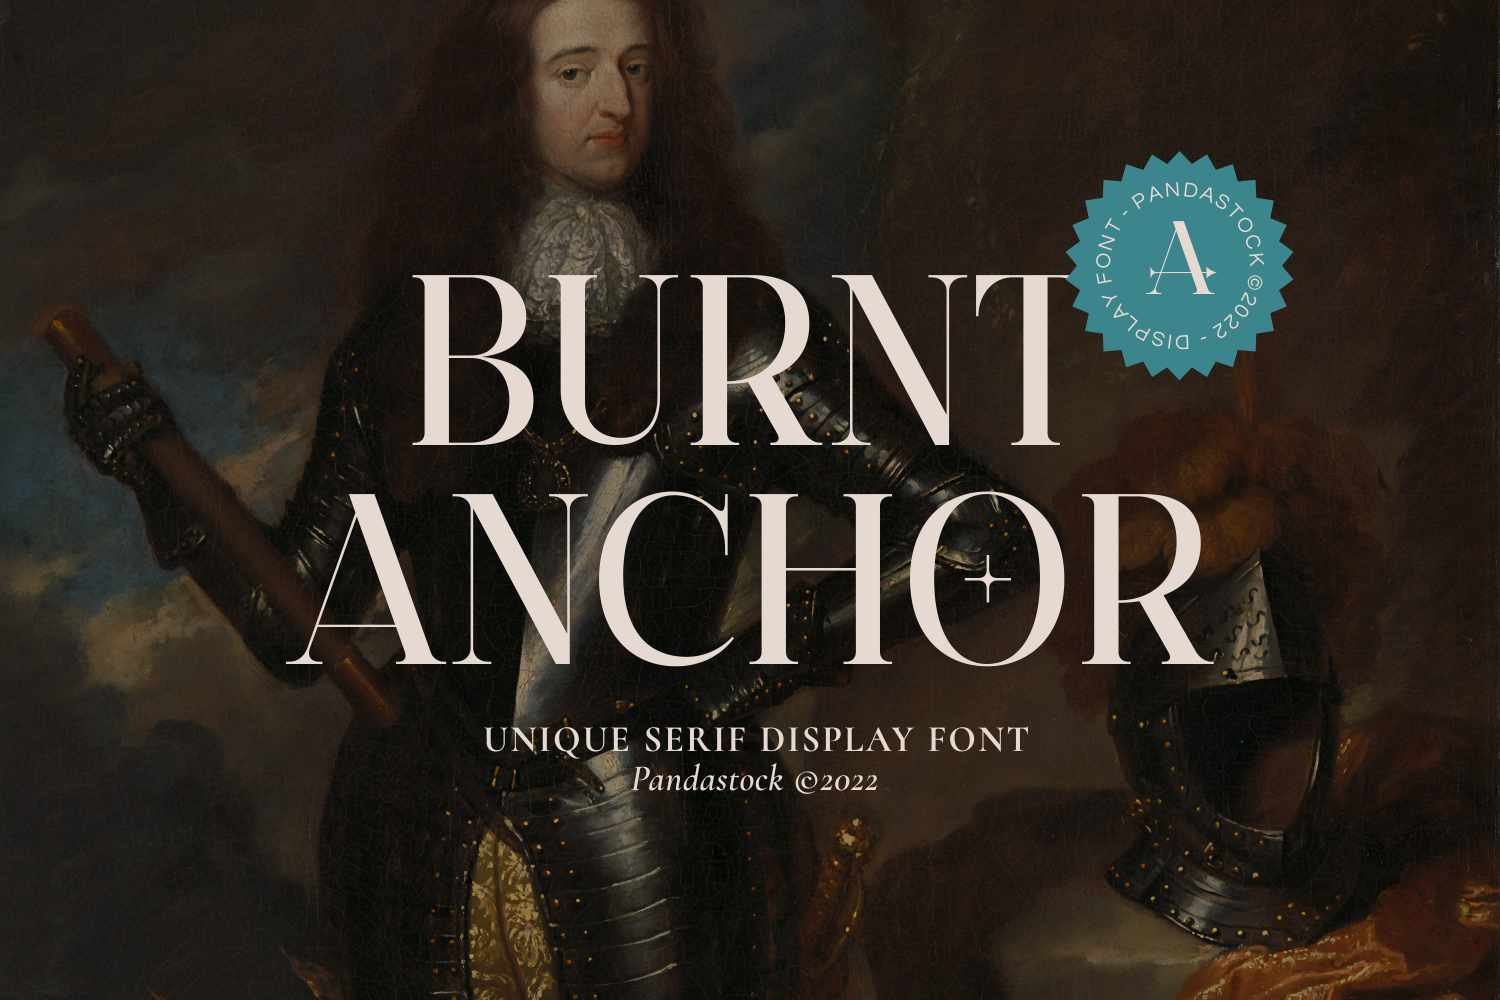 Burnt Anchor - Clean Serif Fonts cover image.